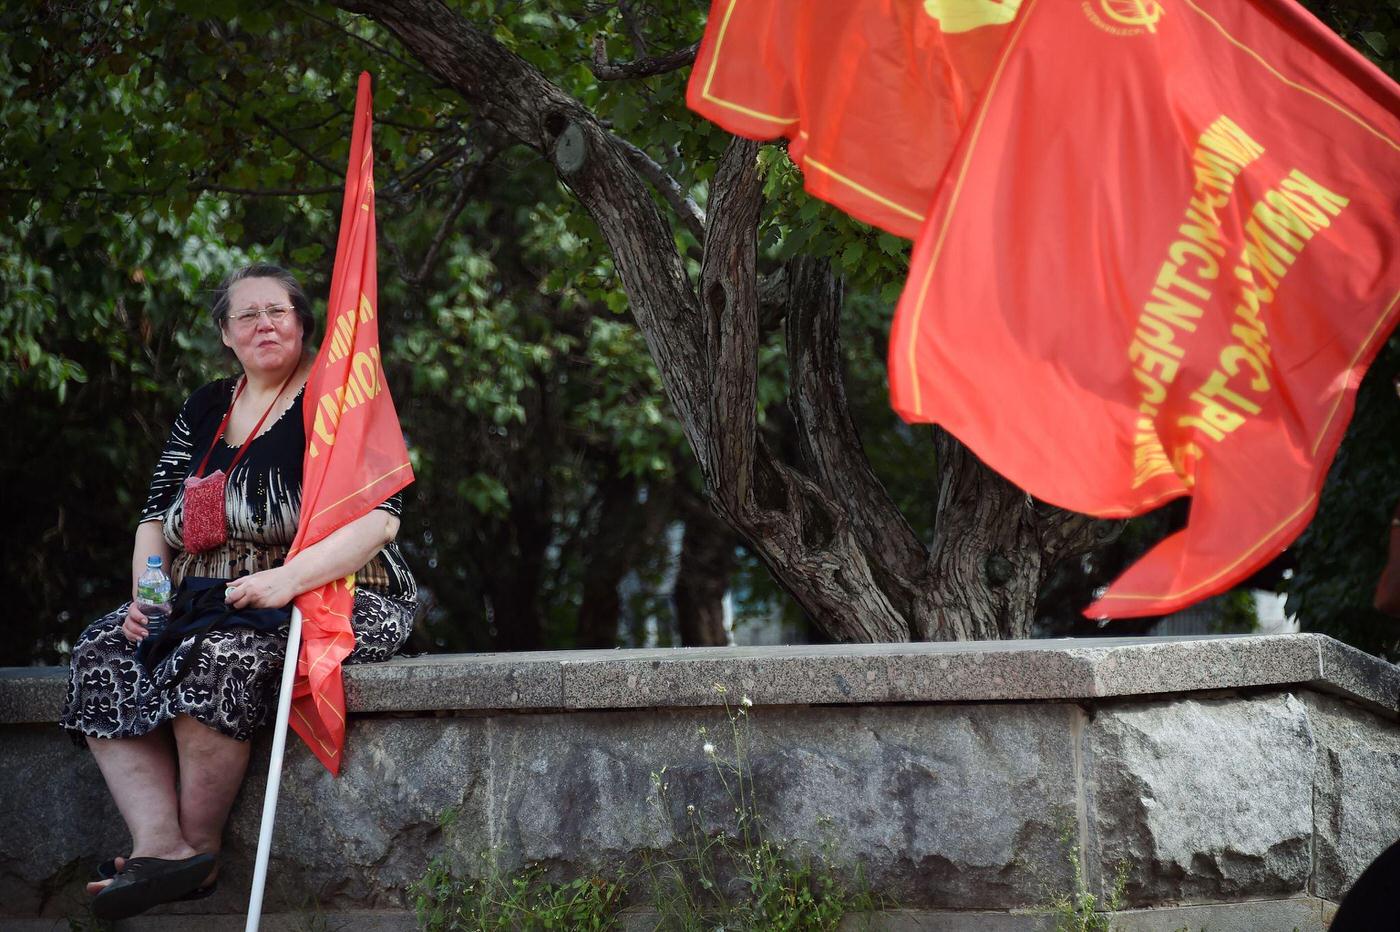 Russian Communist supporter with red flag sits on a wall during rally in downtown Moscow marking the 25th anniversary of the August 1991 putsch.